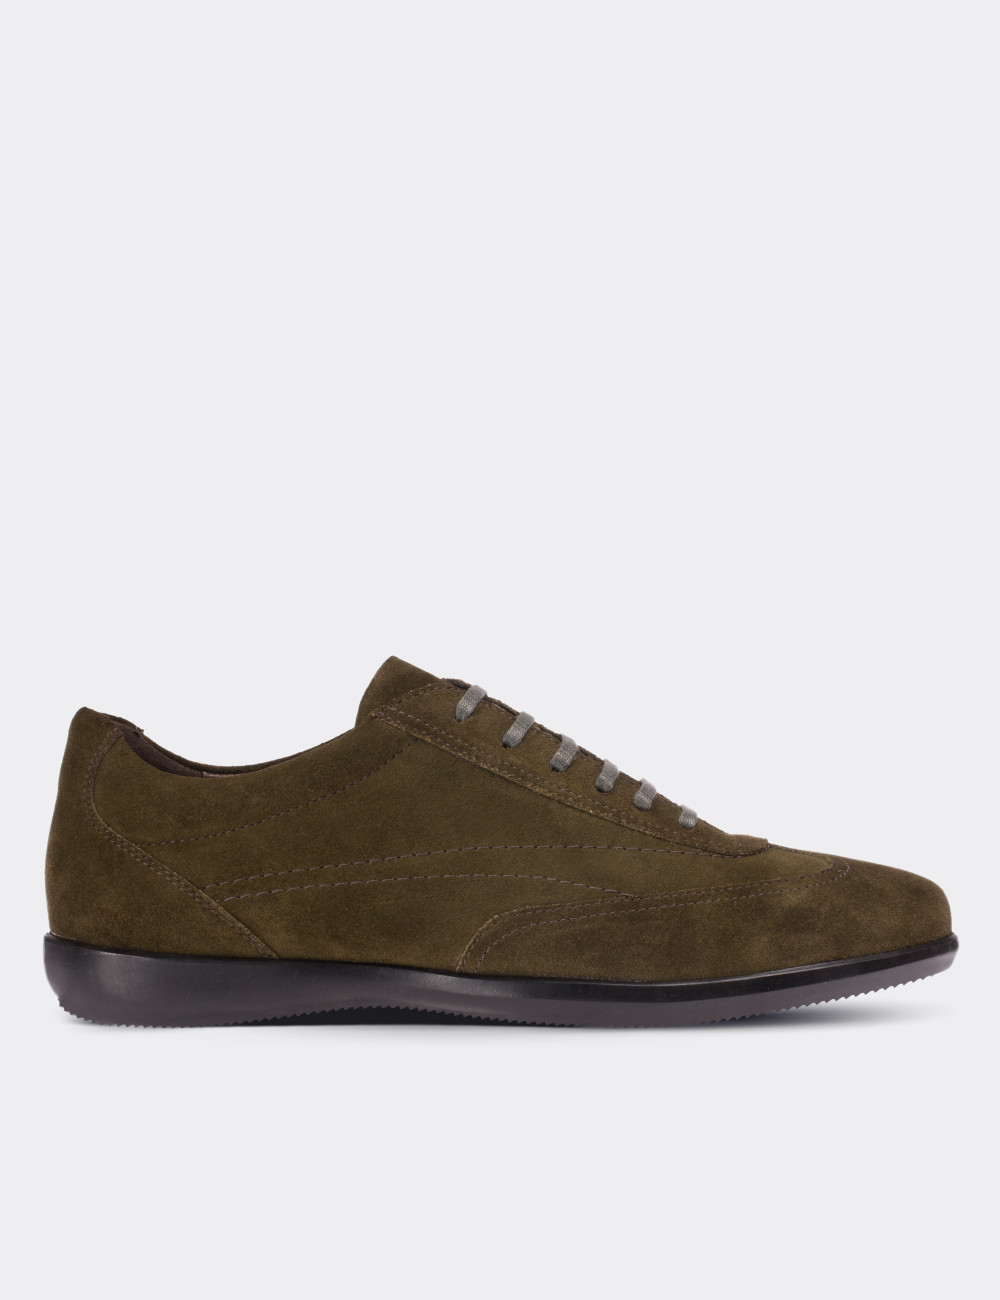 Green Suede Leather Lace-up Shoes - 00321MYSLC04